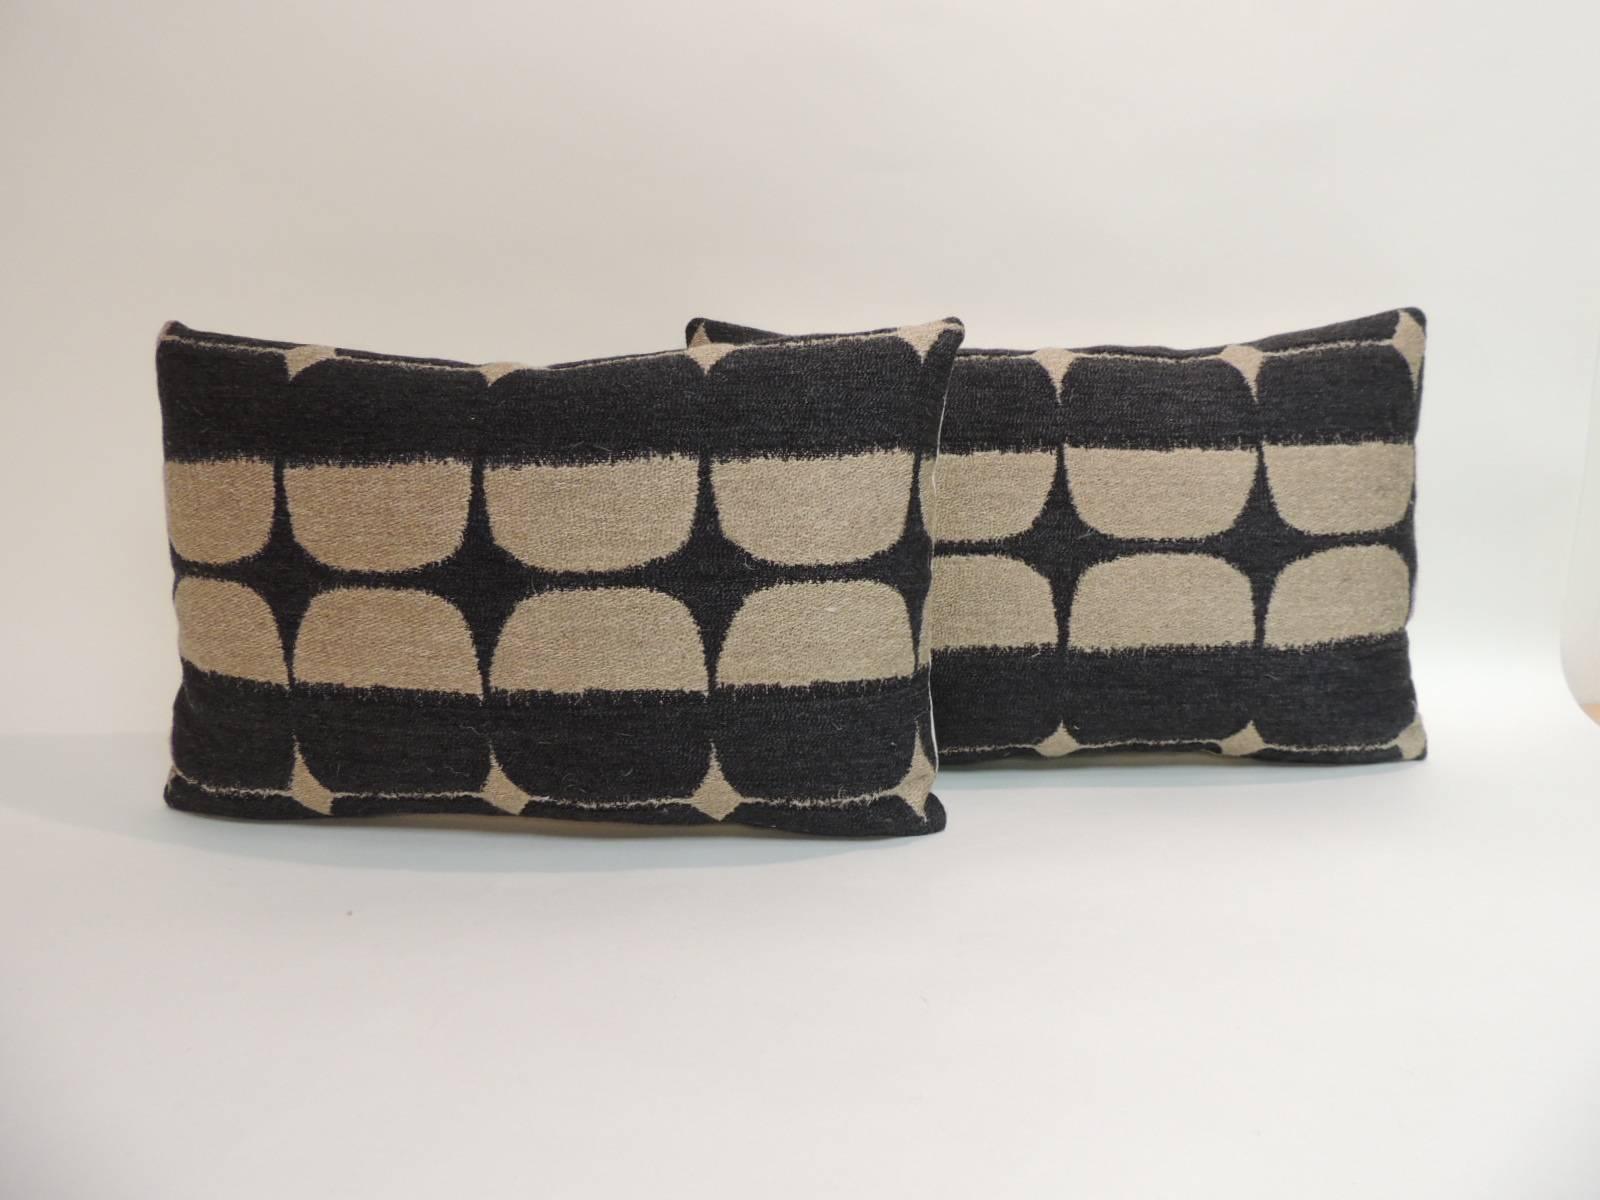 Antique Textiles Galleries...
1970s German Mid-Century Modern lumbar pillows, geometric weaved design with a natural cotton backing.  Decorative pillows handcrafted and designed in the USA. Closure by stitch (no zipper closure) with a custom-made